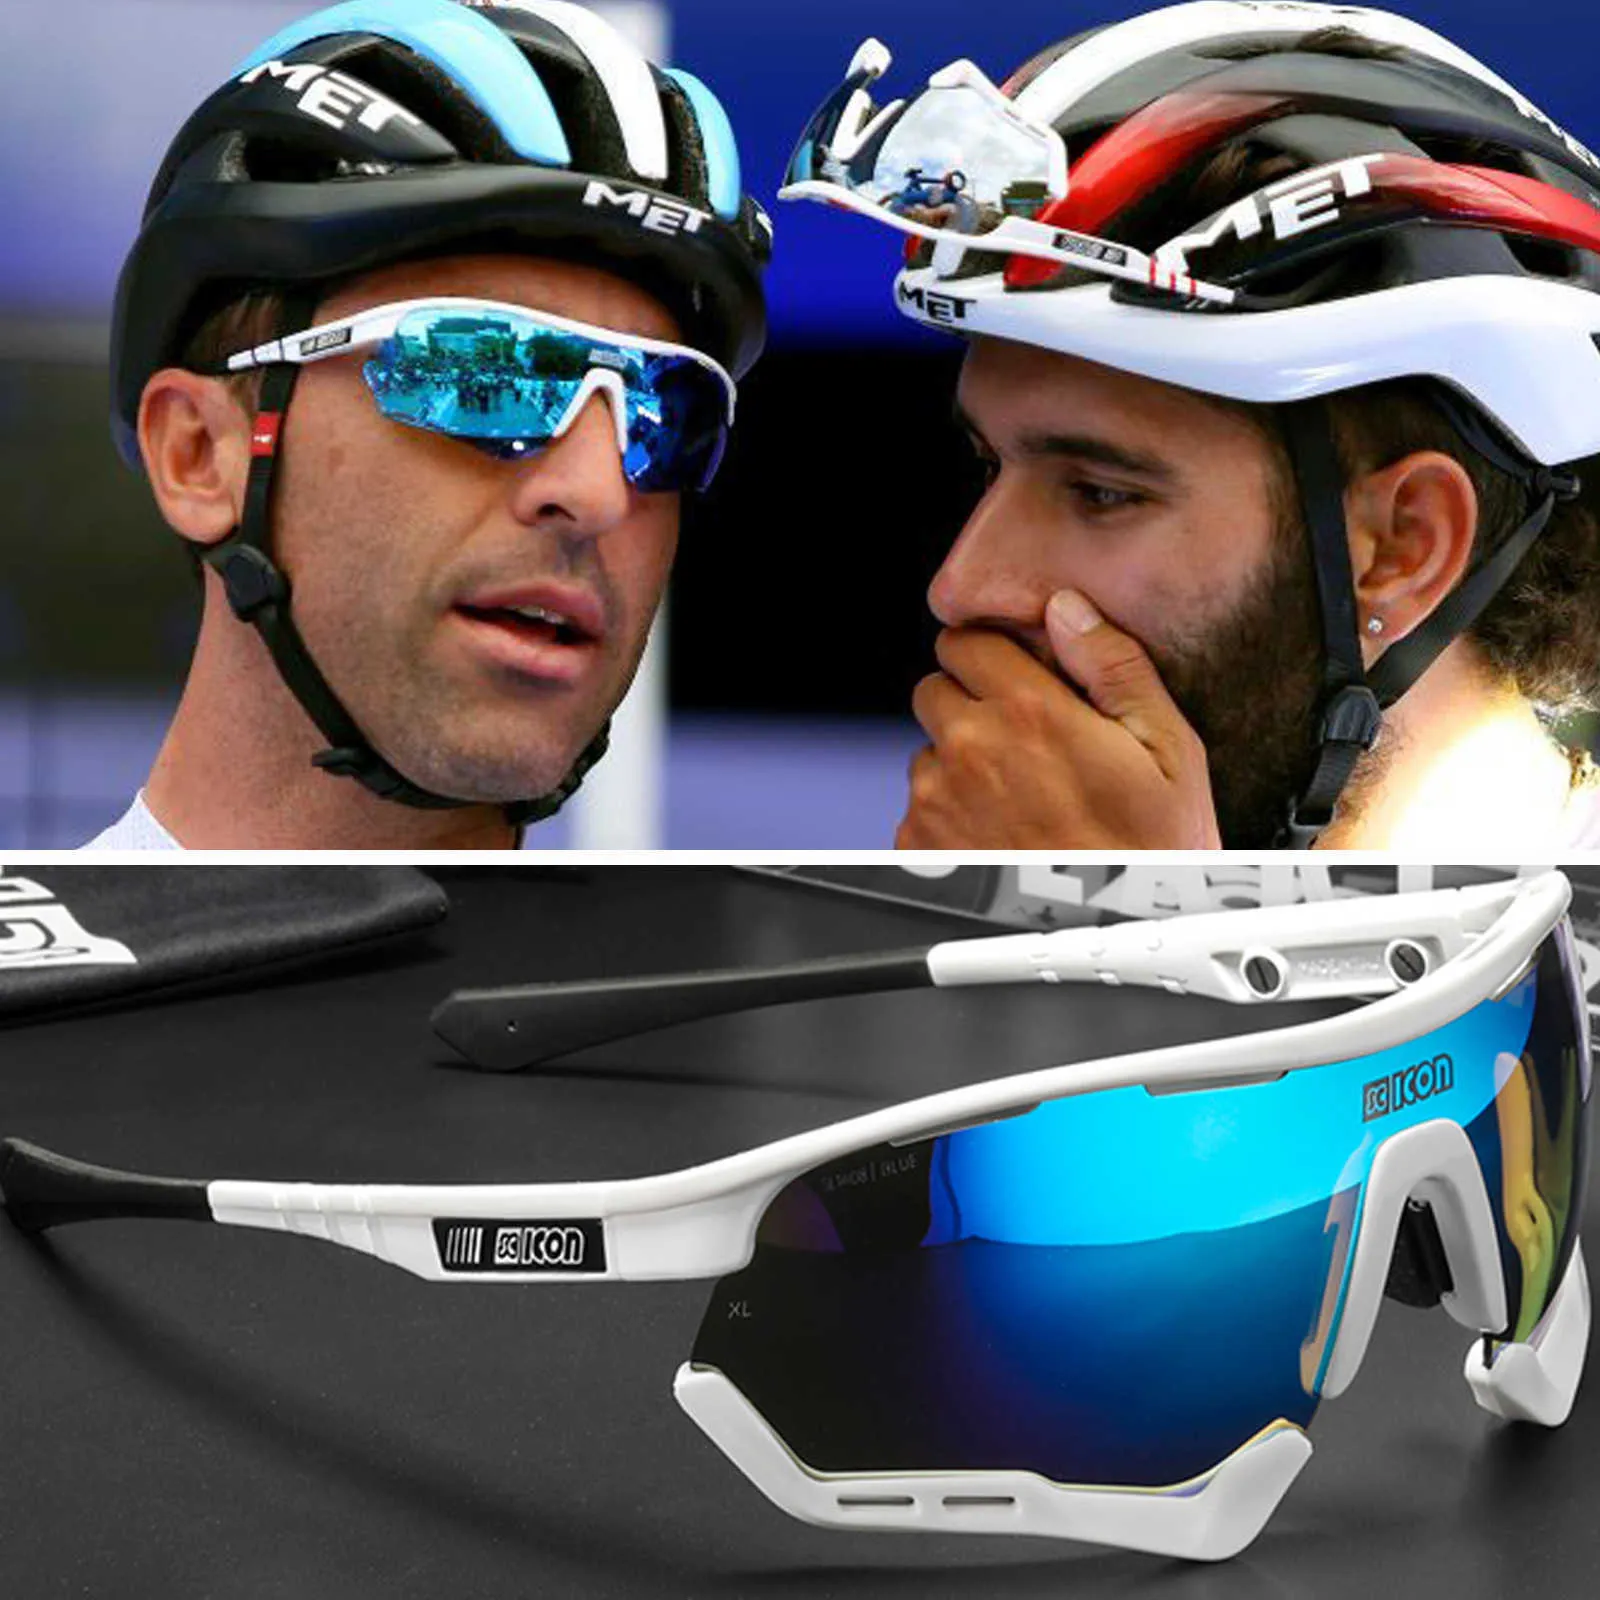 Polarized Photochromic Cycling Sunglasses For Men And Women, Outdoor Sports Glasses  For Fishing, MTB, Road Bike, HKD230626 From Miick, $15.76